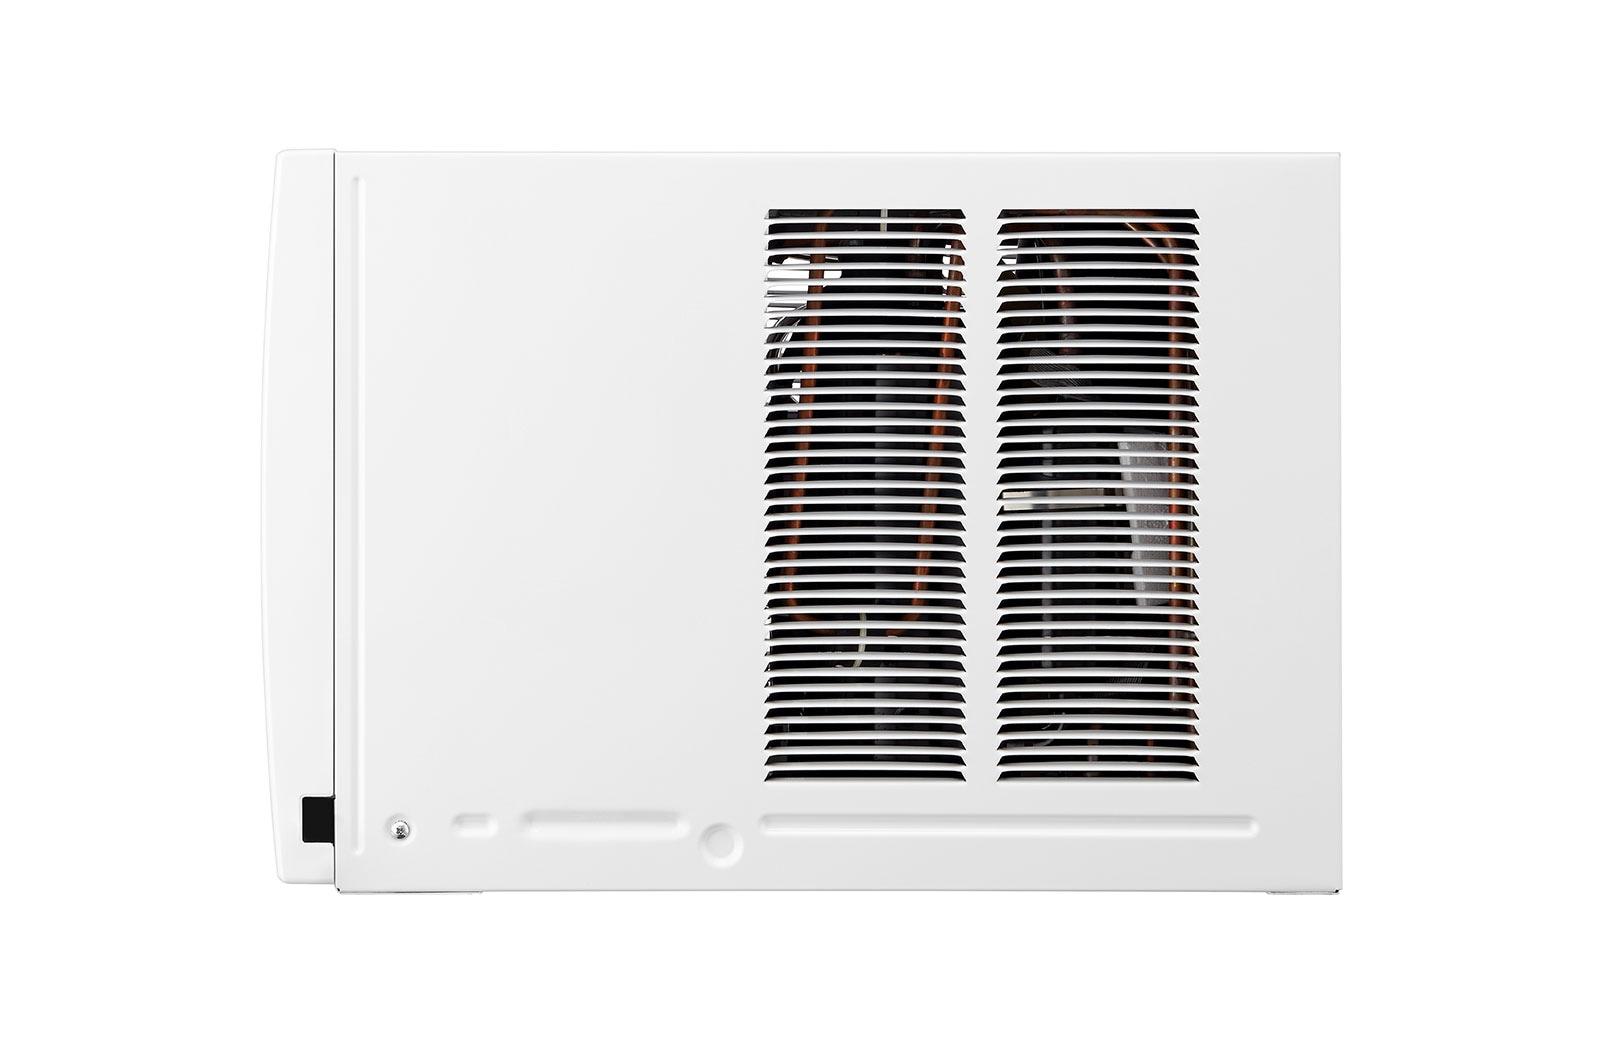 Lg 12,000 BTU Smart Wi-Fi Enabled Window Air Conditioner, Cooling